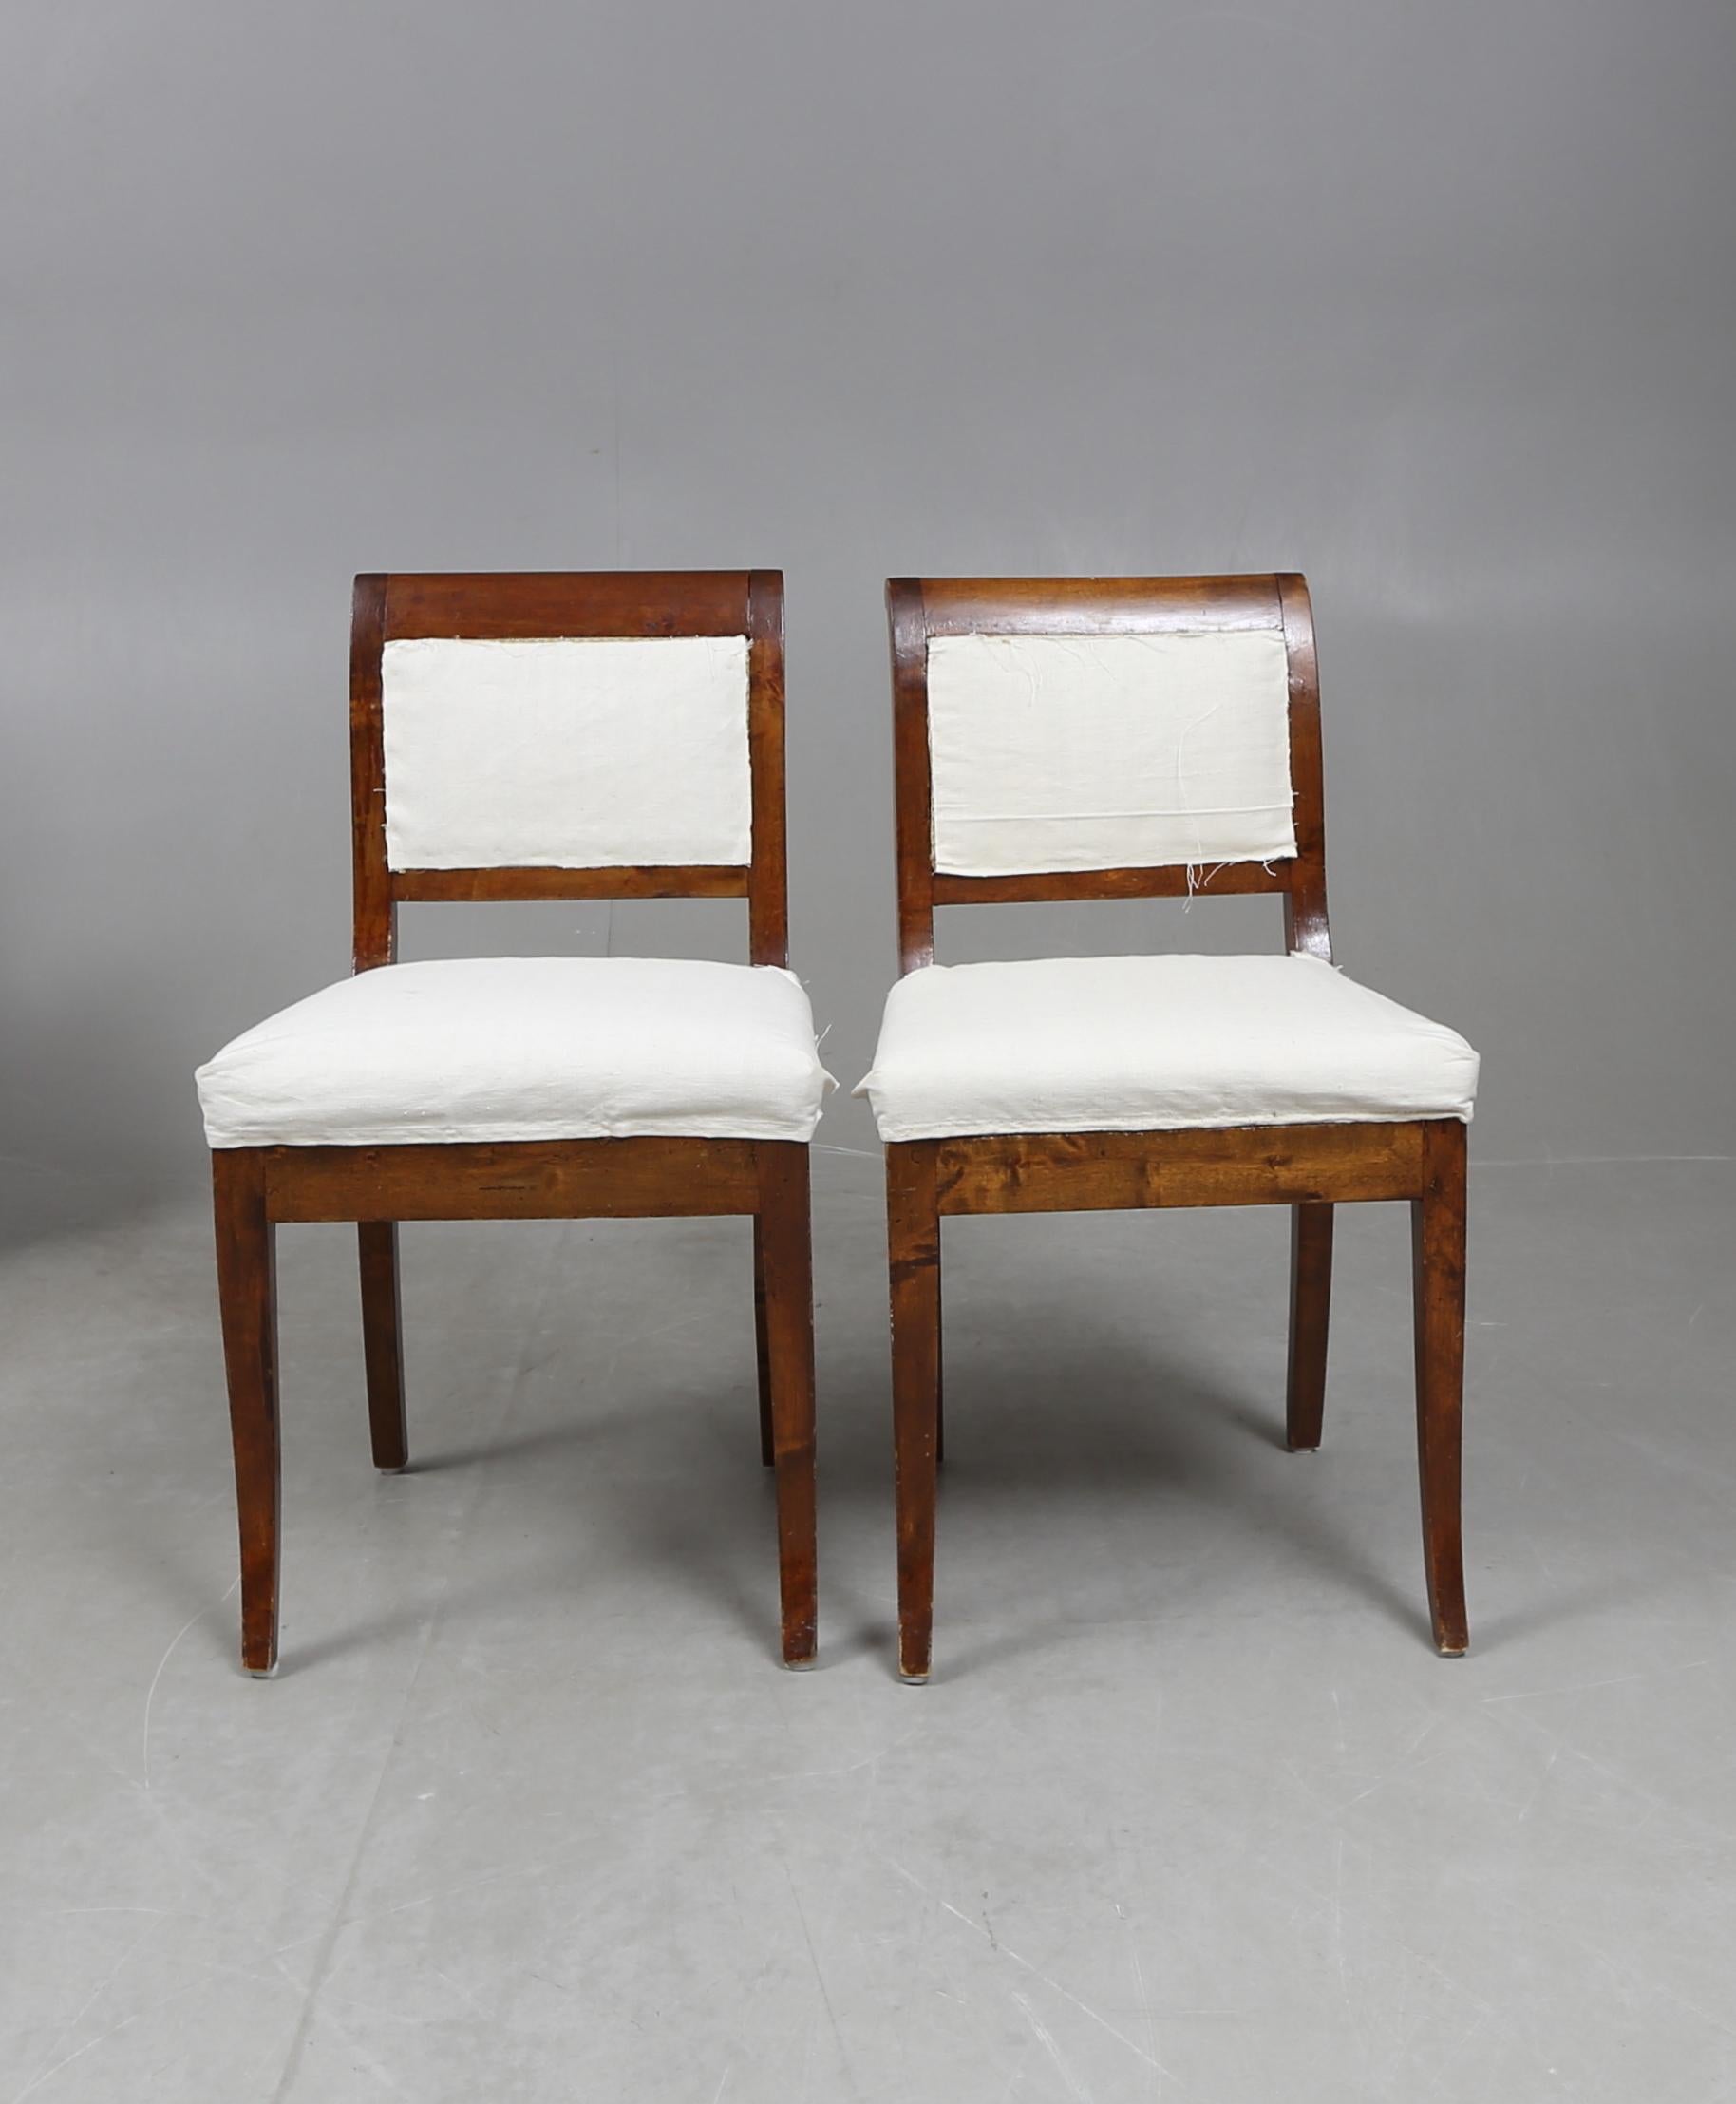 A pair of mahogany chairs, 19th century, possibly Swedish. Wood has a beautiful patina but chairs need to be recovered. Reupholstery services offered upon request. Please indicate if COM (Customer's Own Material) or one of our fabrics (swatches will